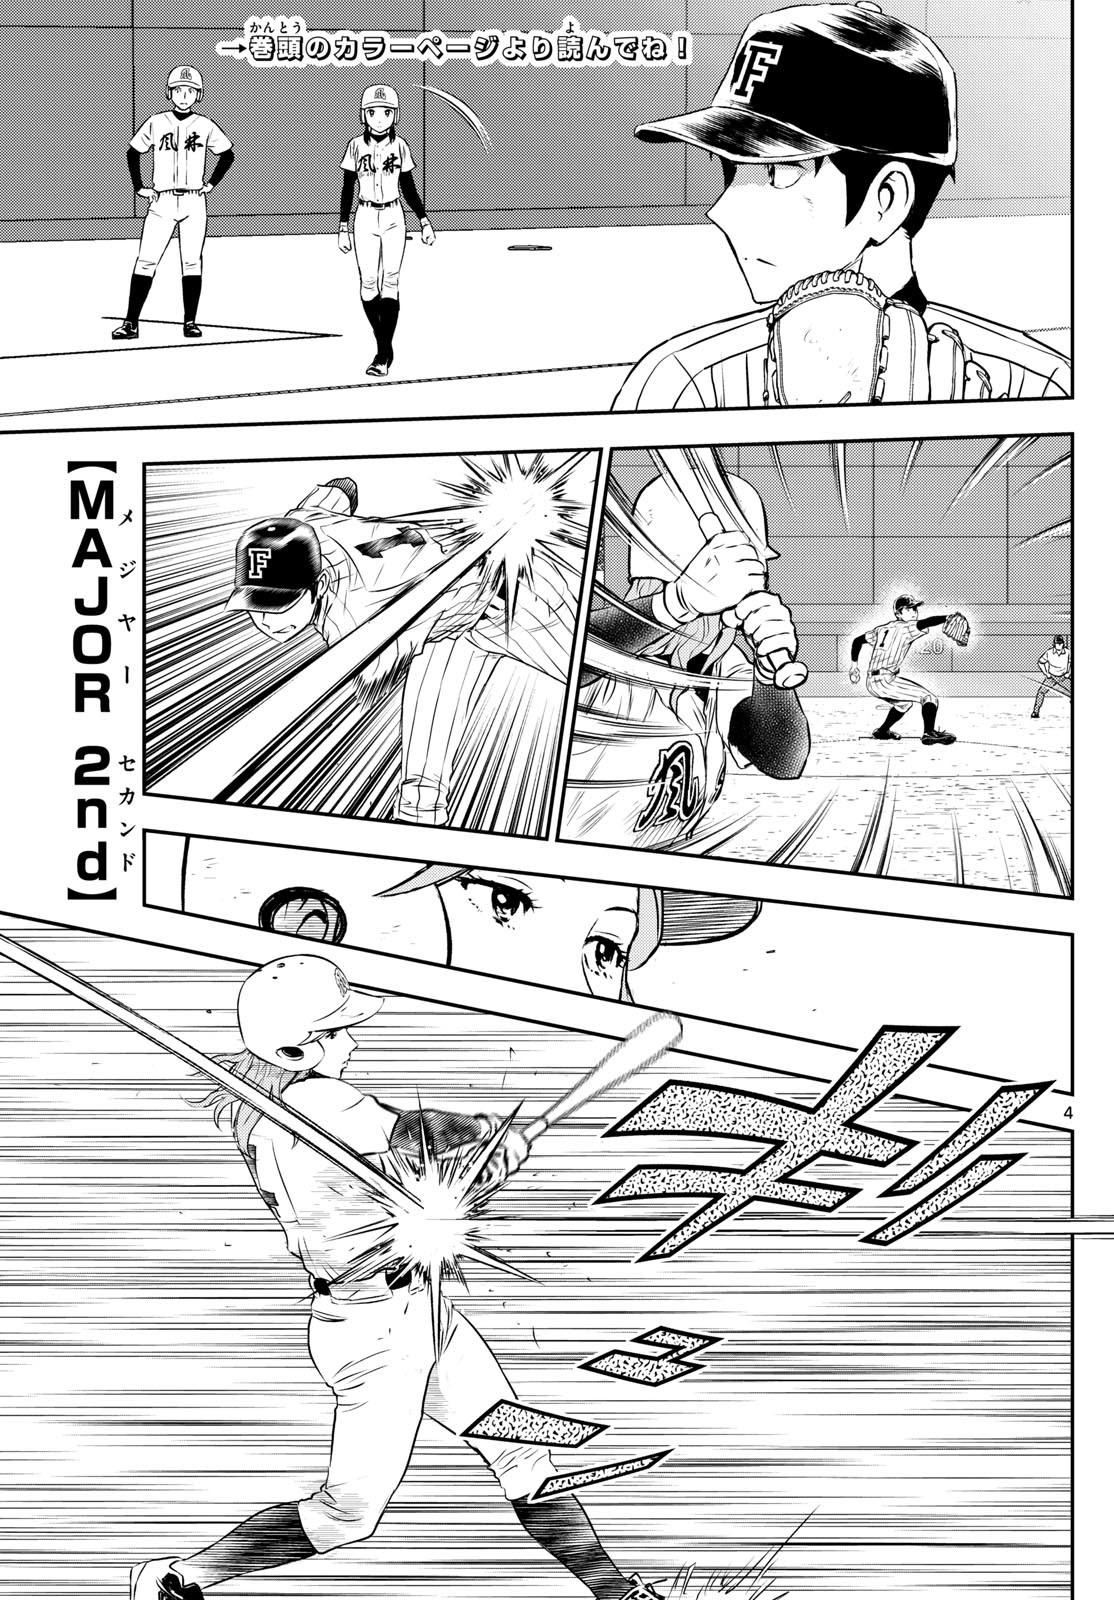 Major 2nd - メジャーセカンド - Chapter 269 - Page 3